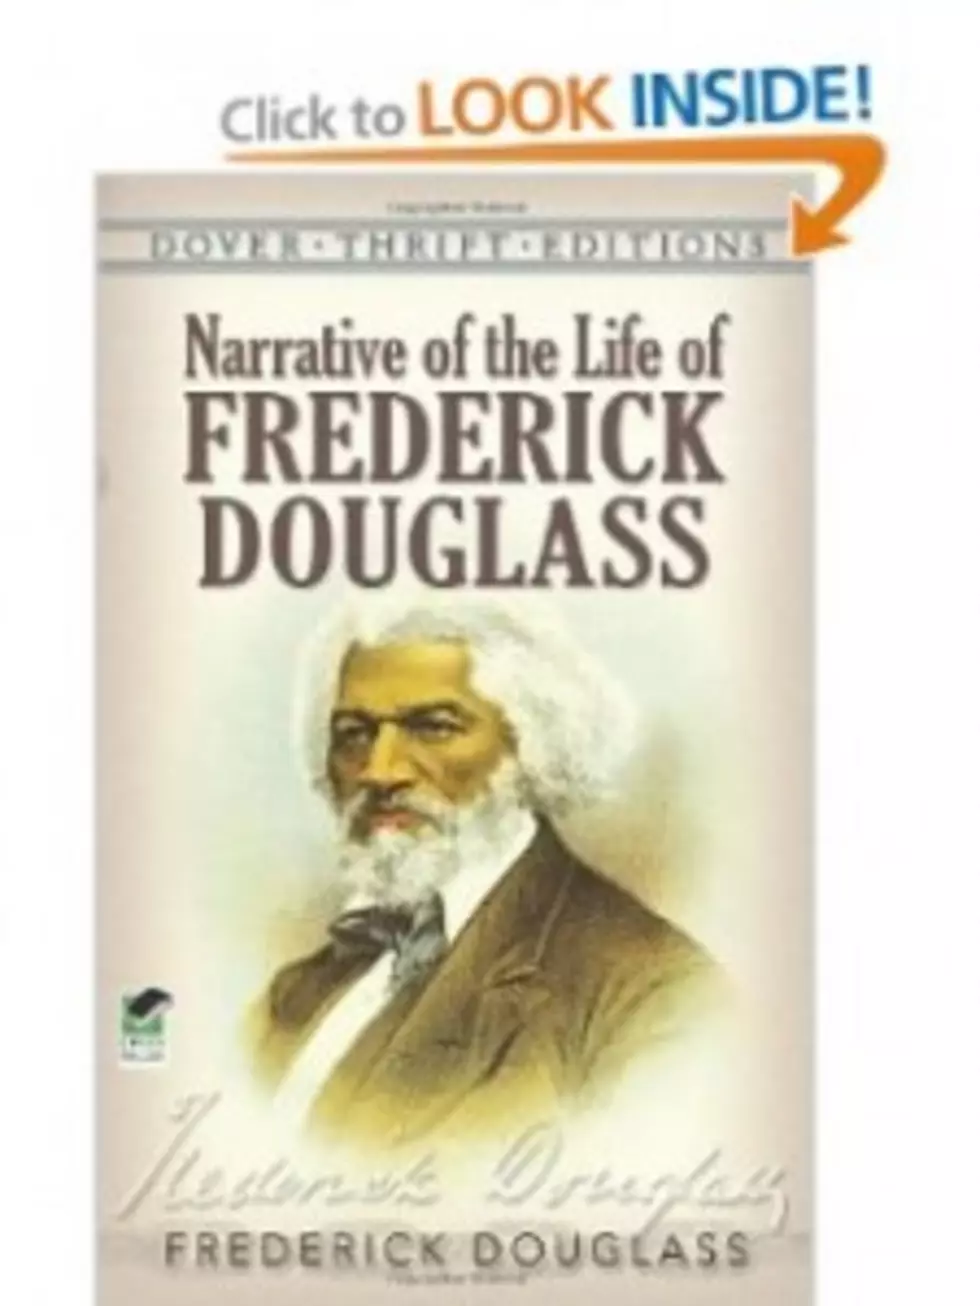 Annual Frederick Douglas Read-A-Thon Success Over Weekend